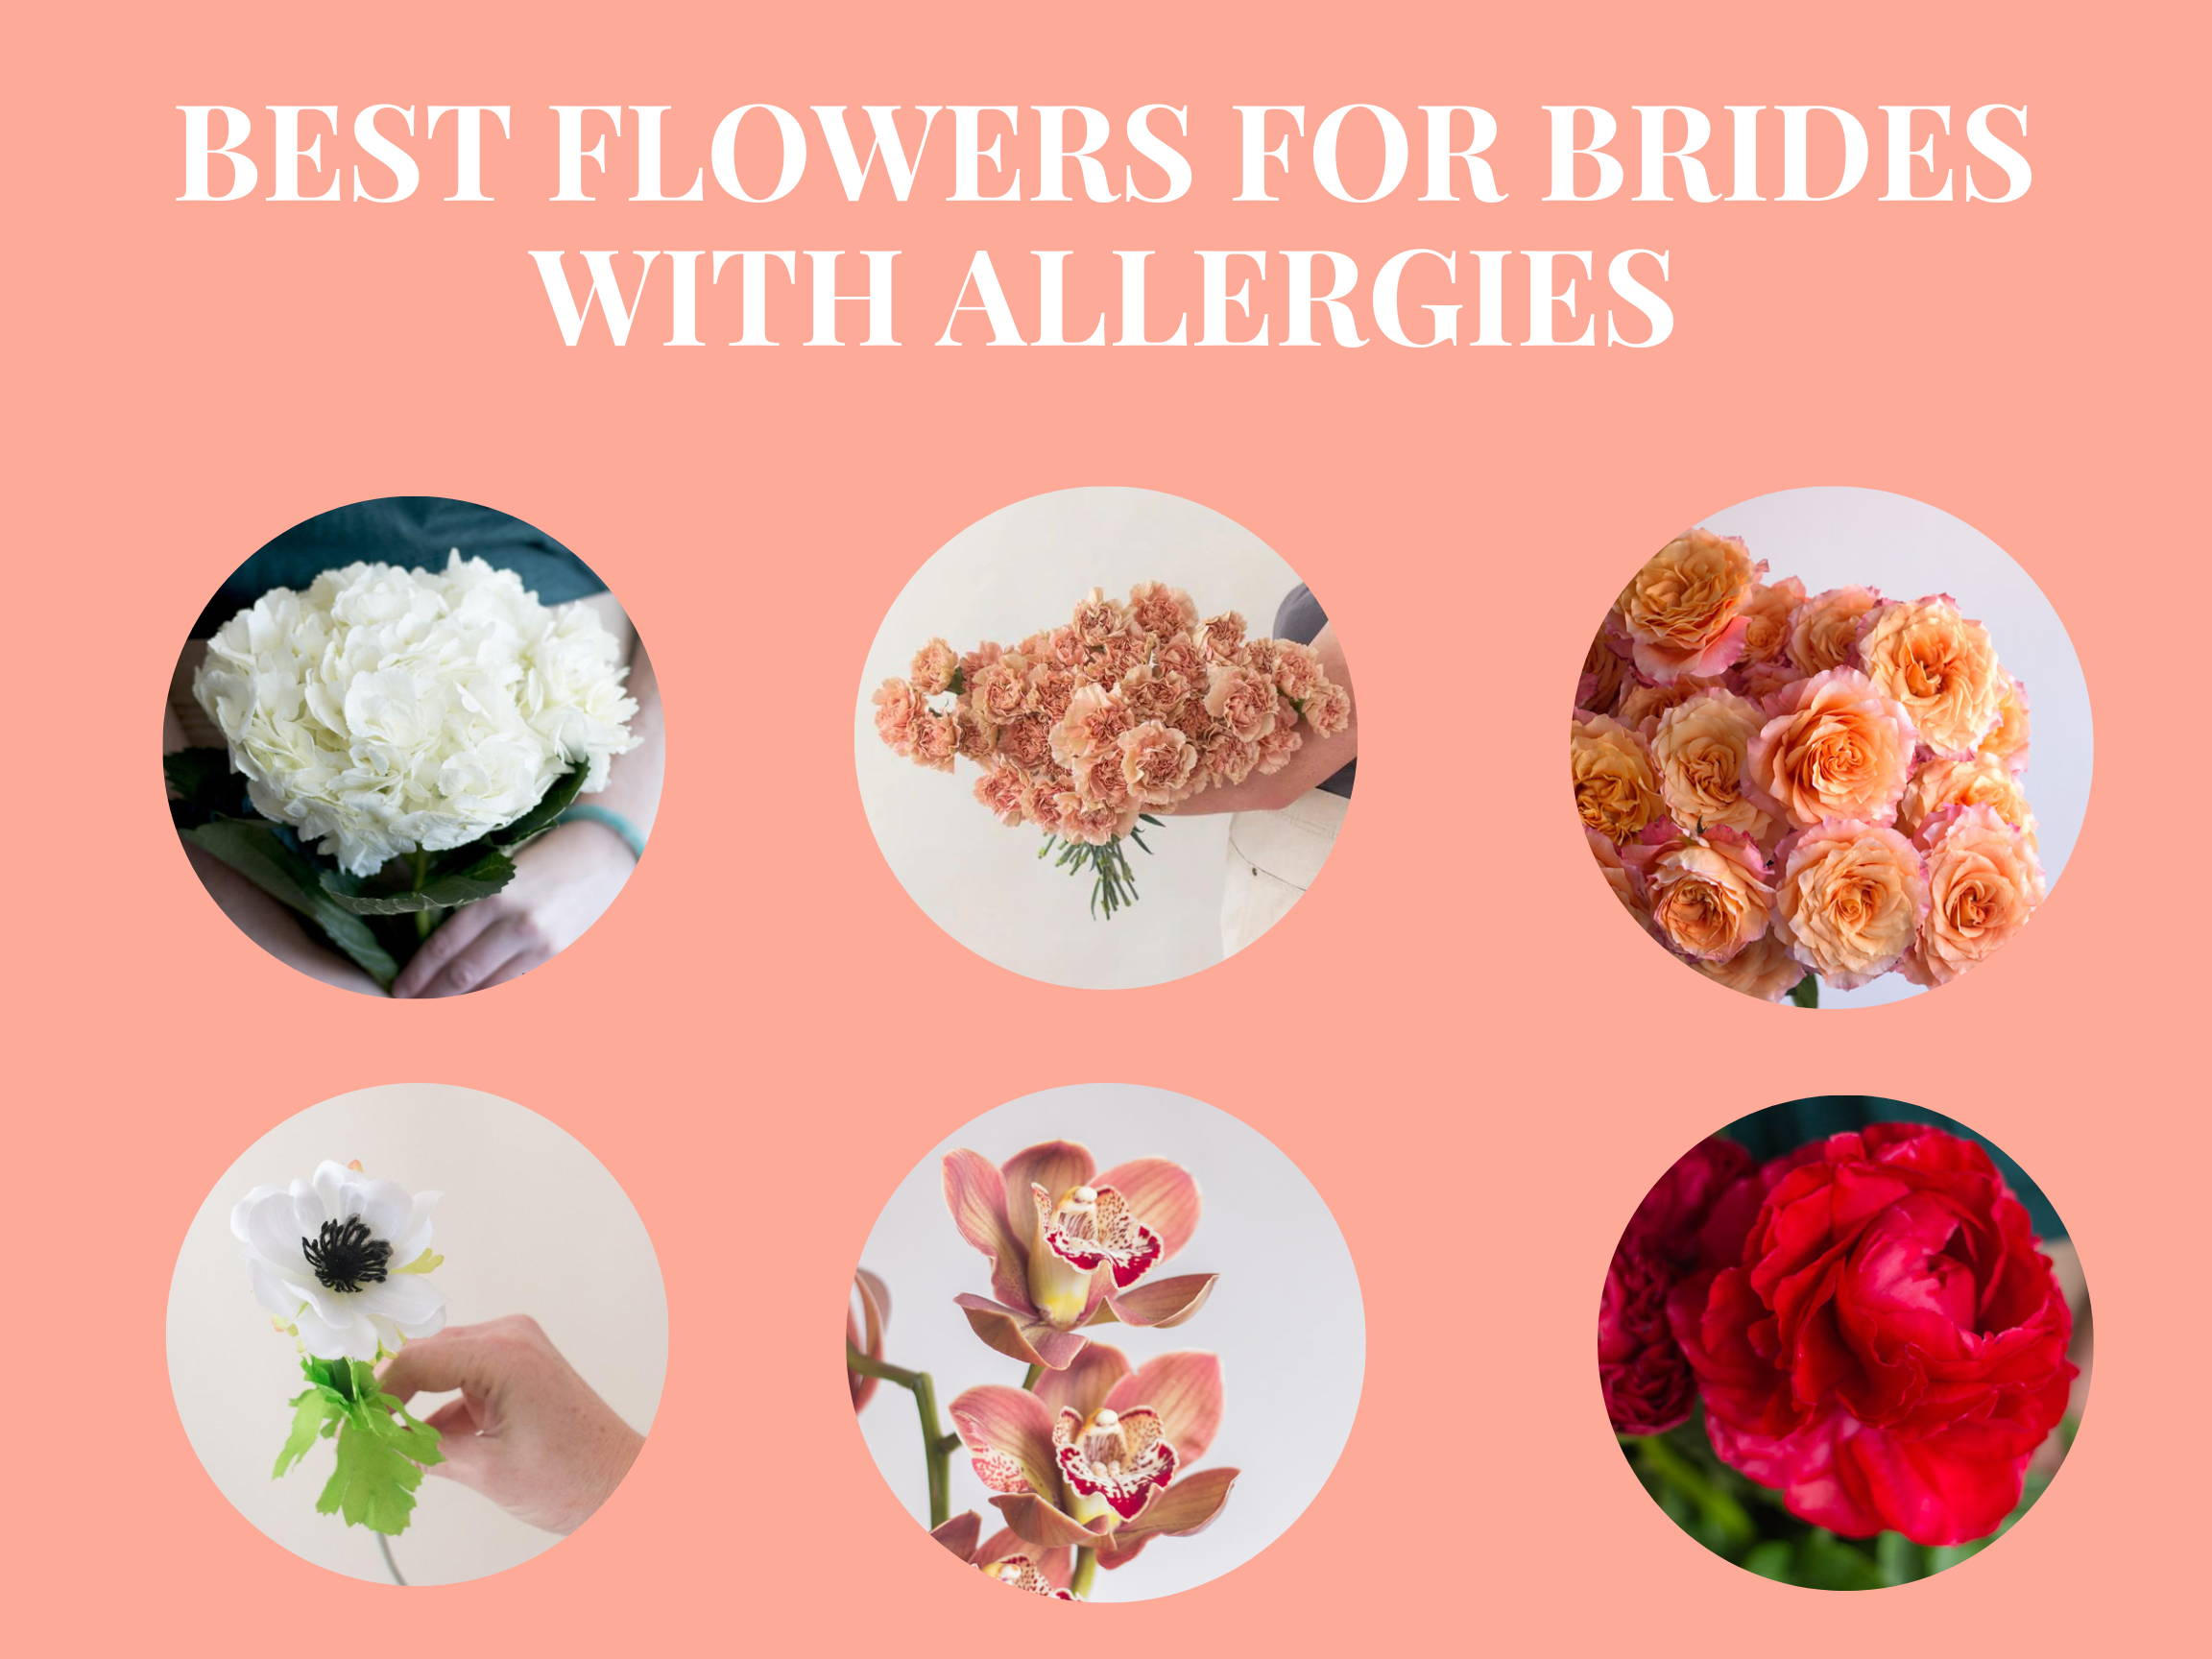 The best wedding flowers for allergy sufferers